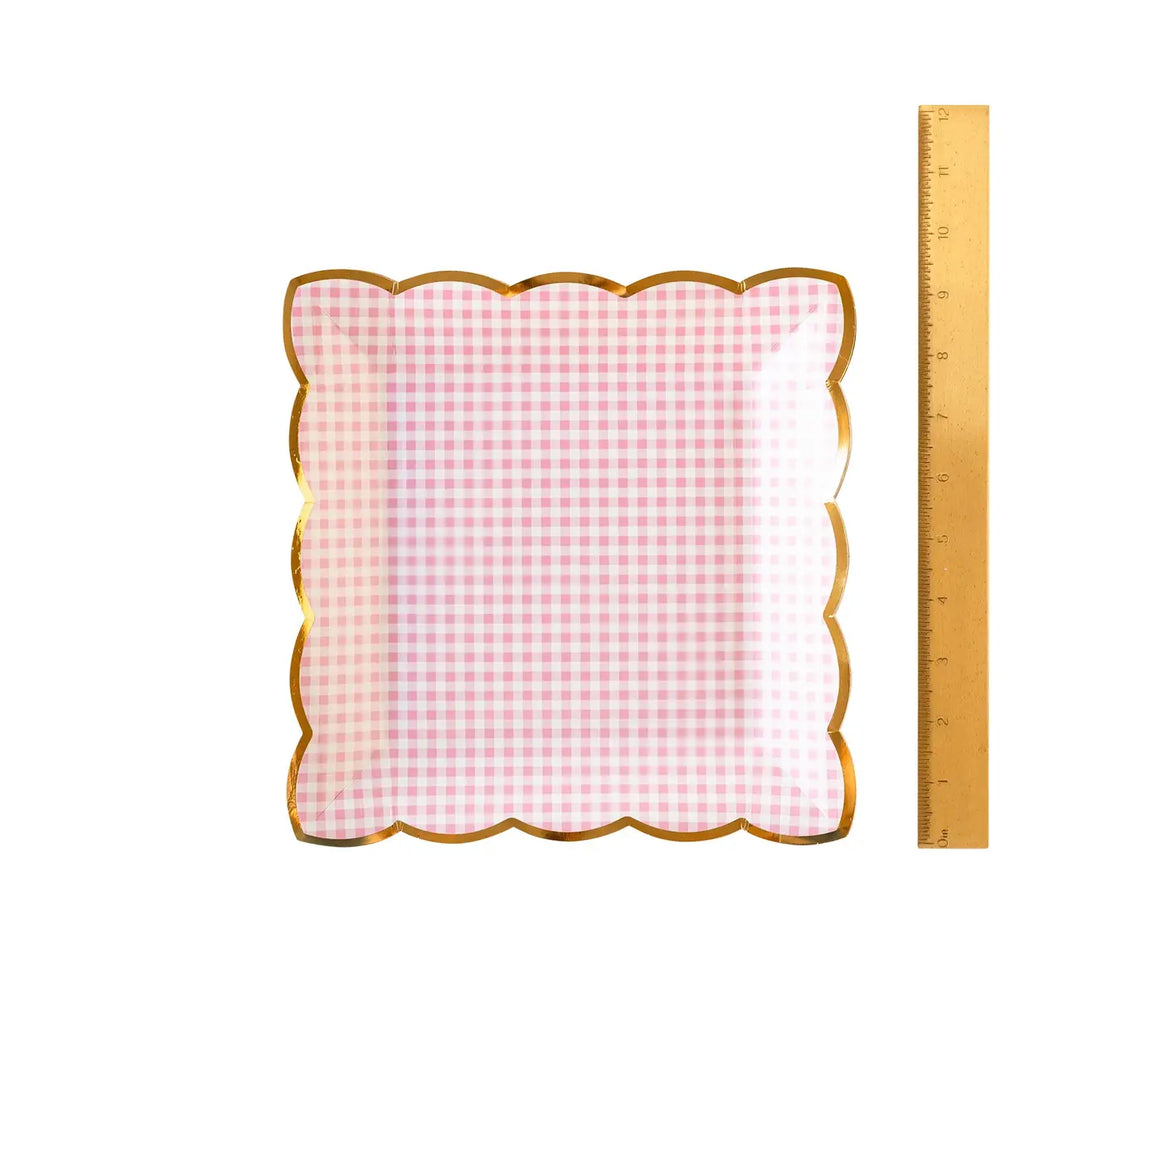 PLATES LARGE - PINK GINGHAM WITH GOLD SCALLOP